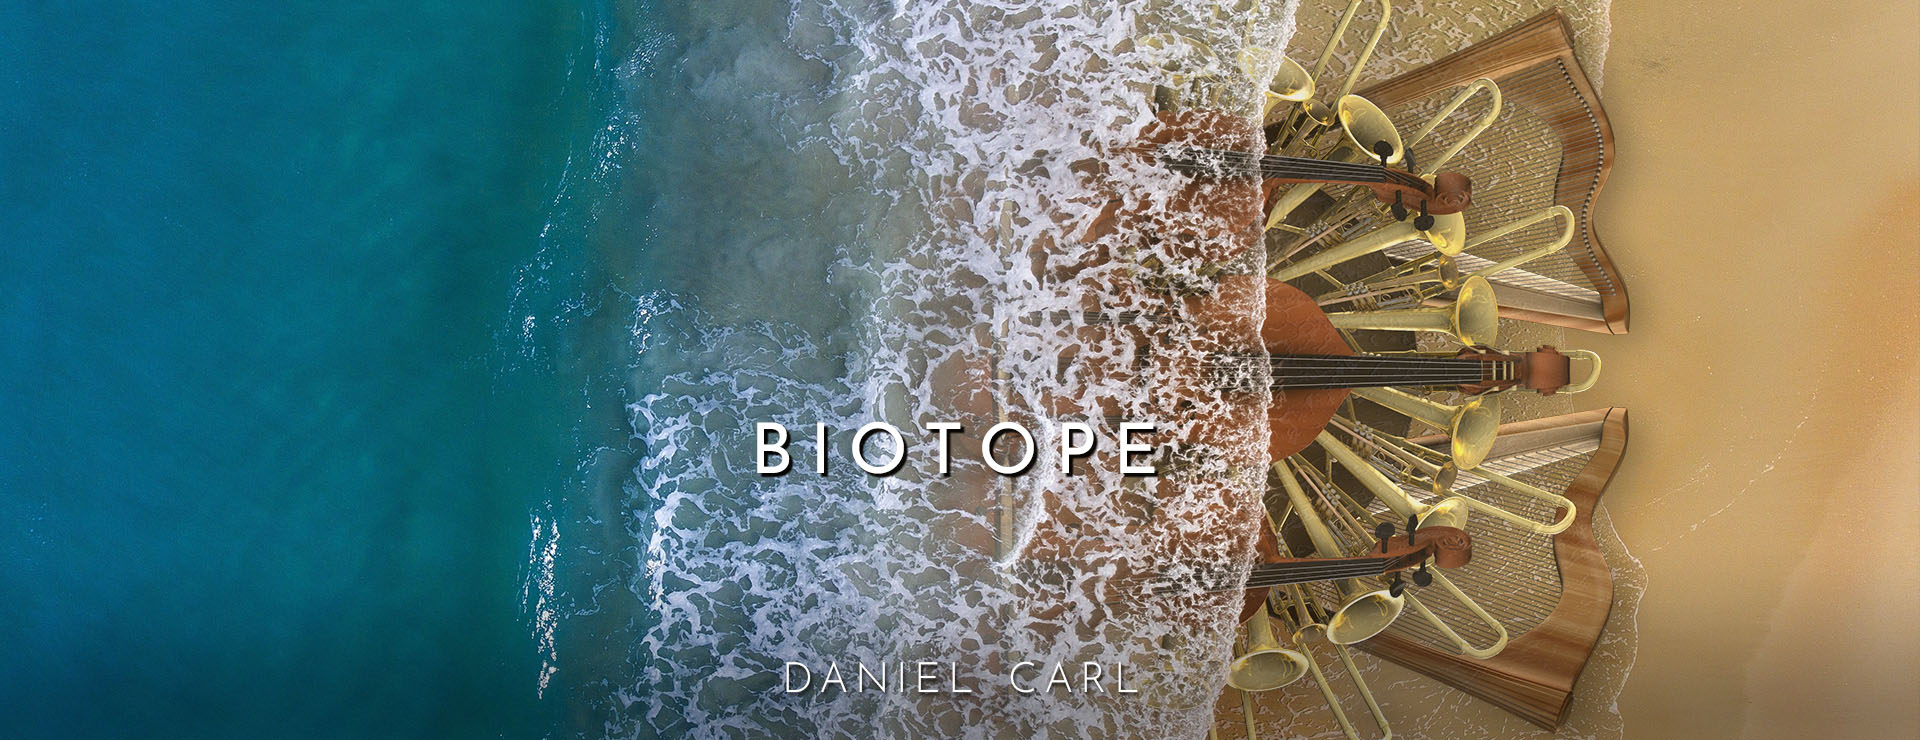 BIOTOPE - Ambient Music Pack